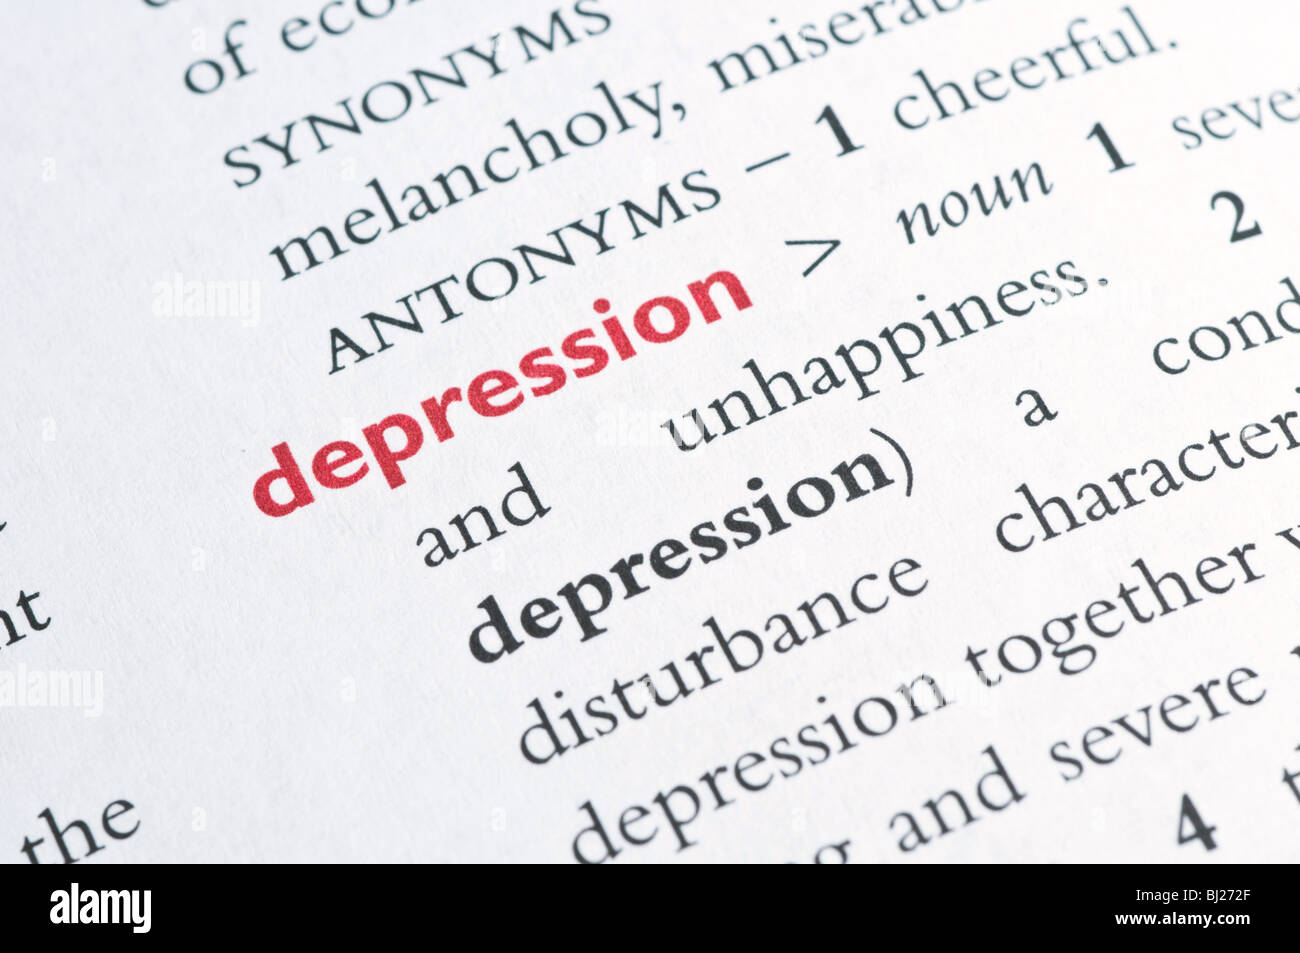 Dictionary definition of depression Stock Photo